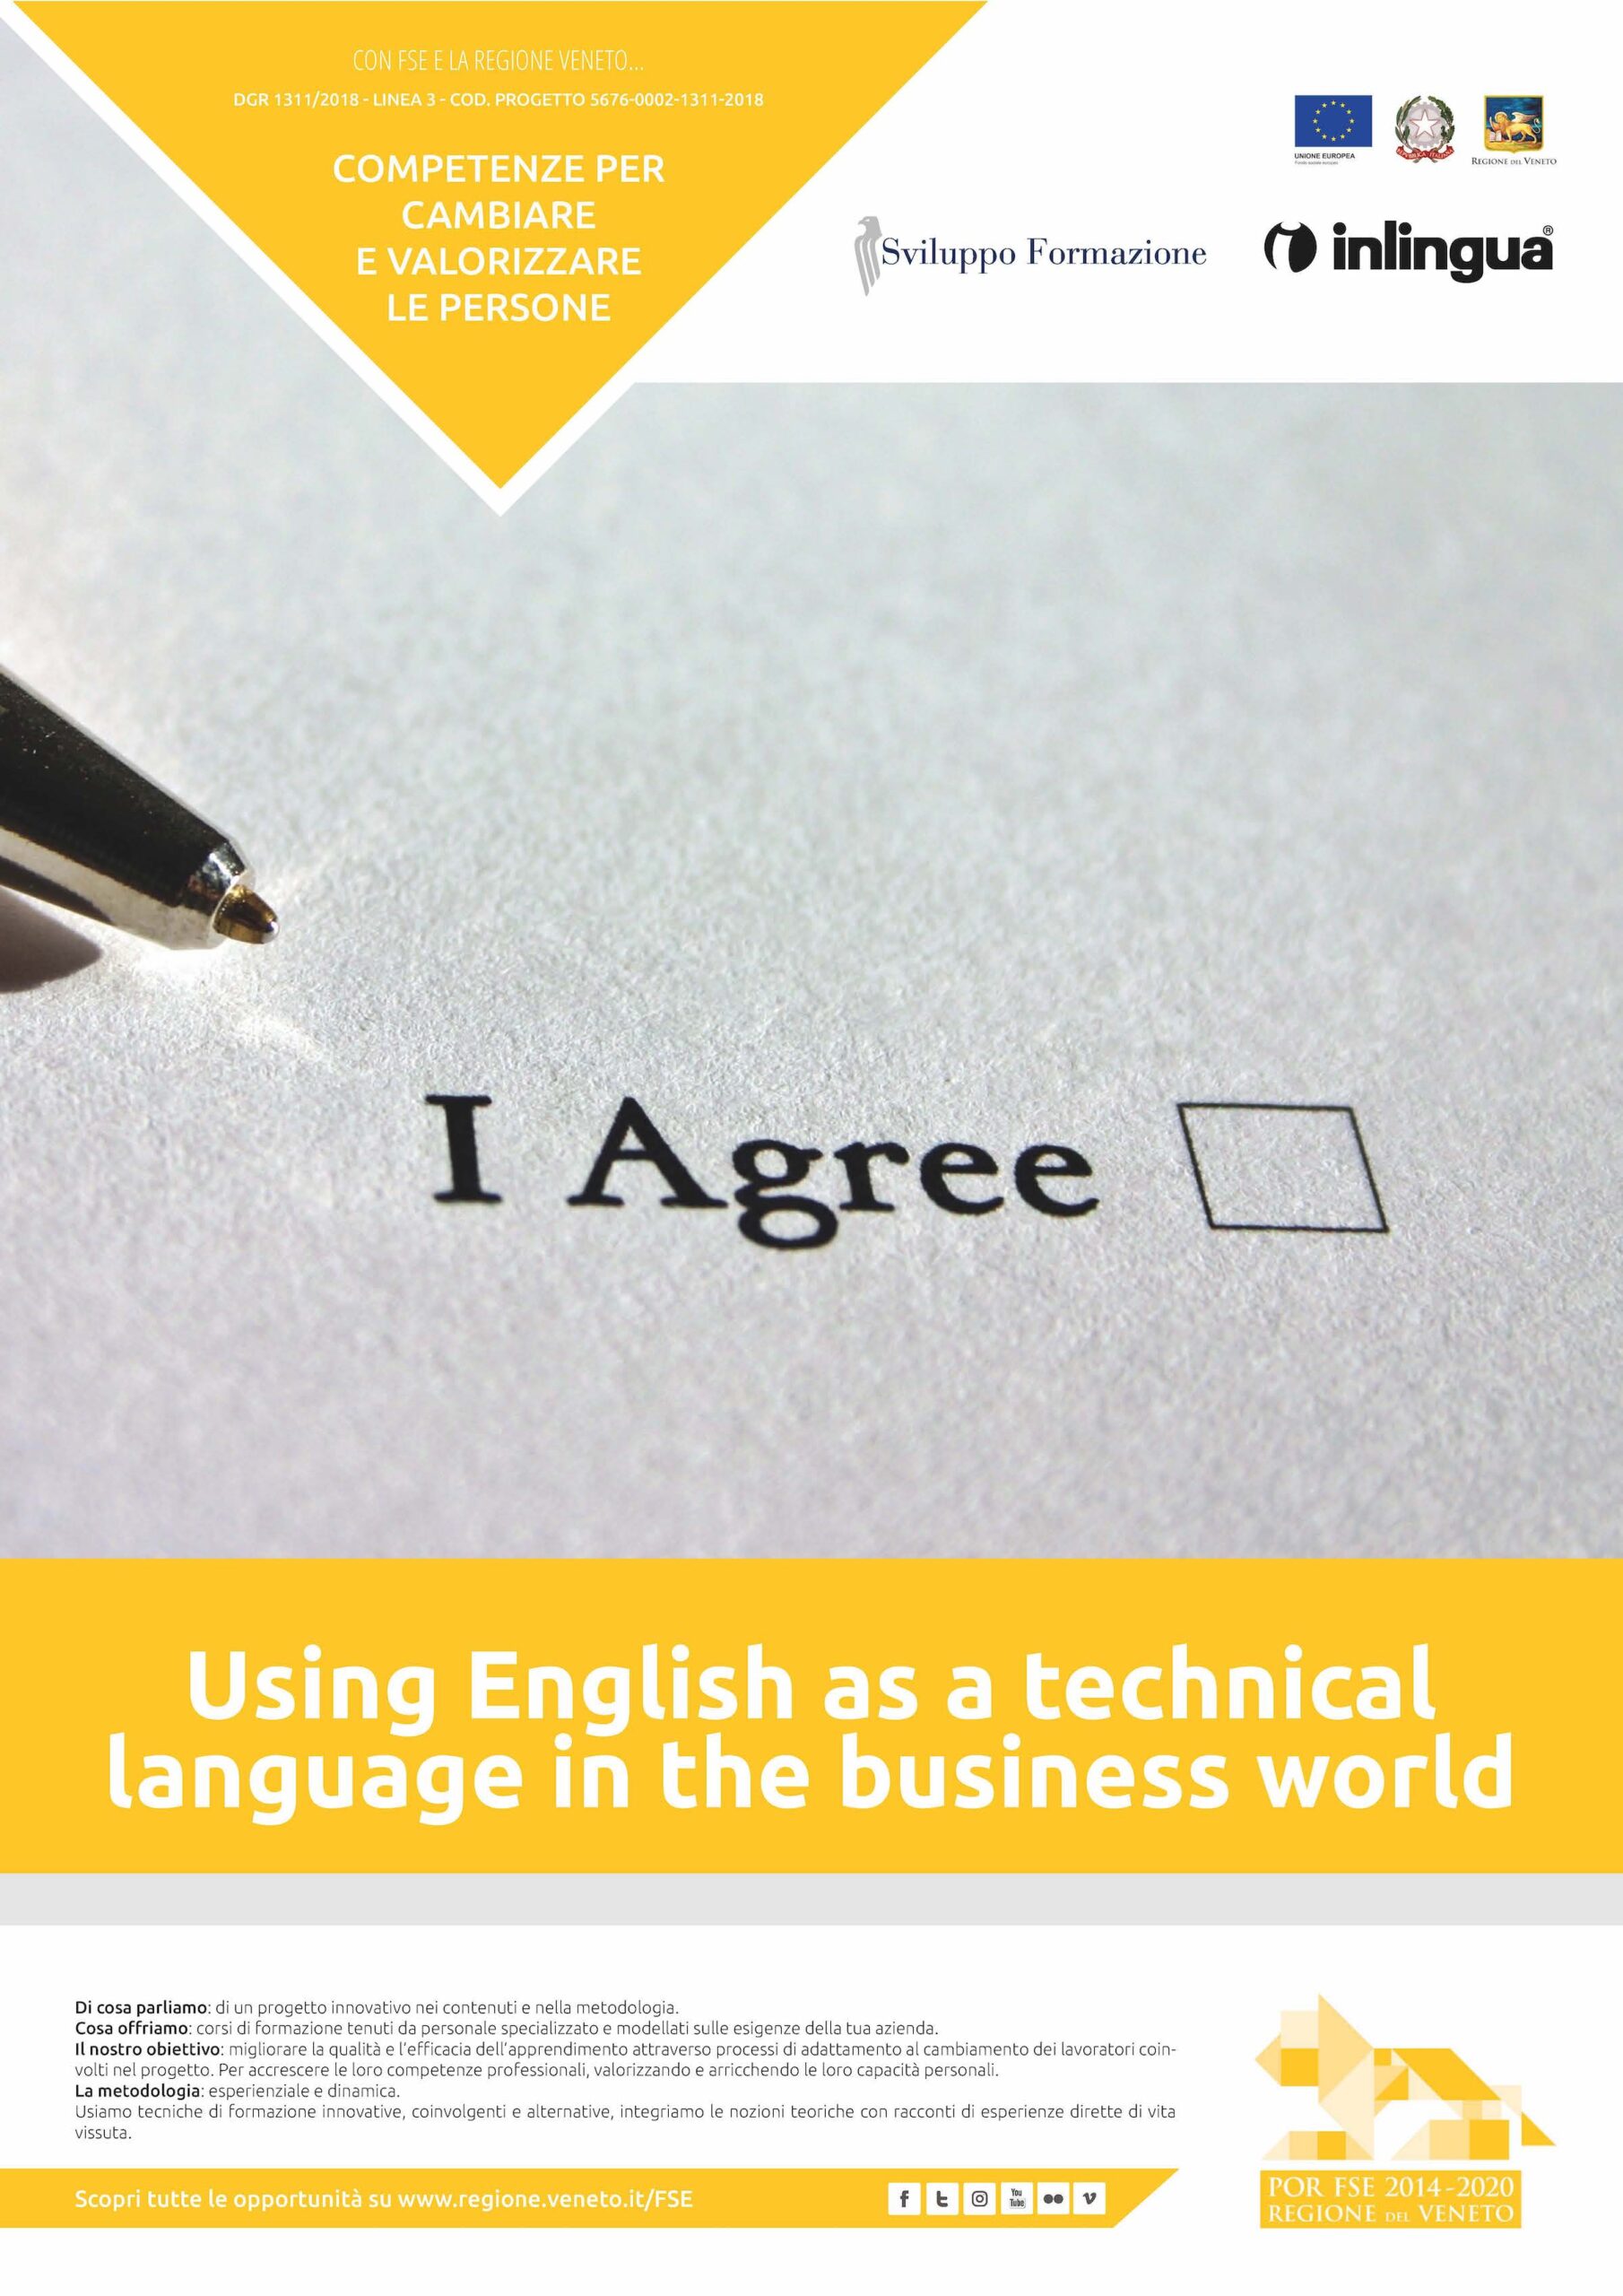 DGR 1311/2018: Using English as a technical language in the business world